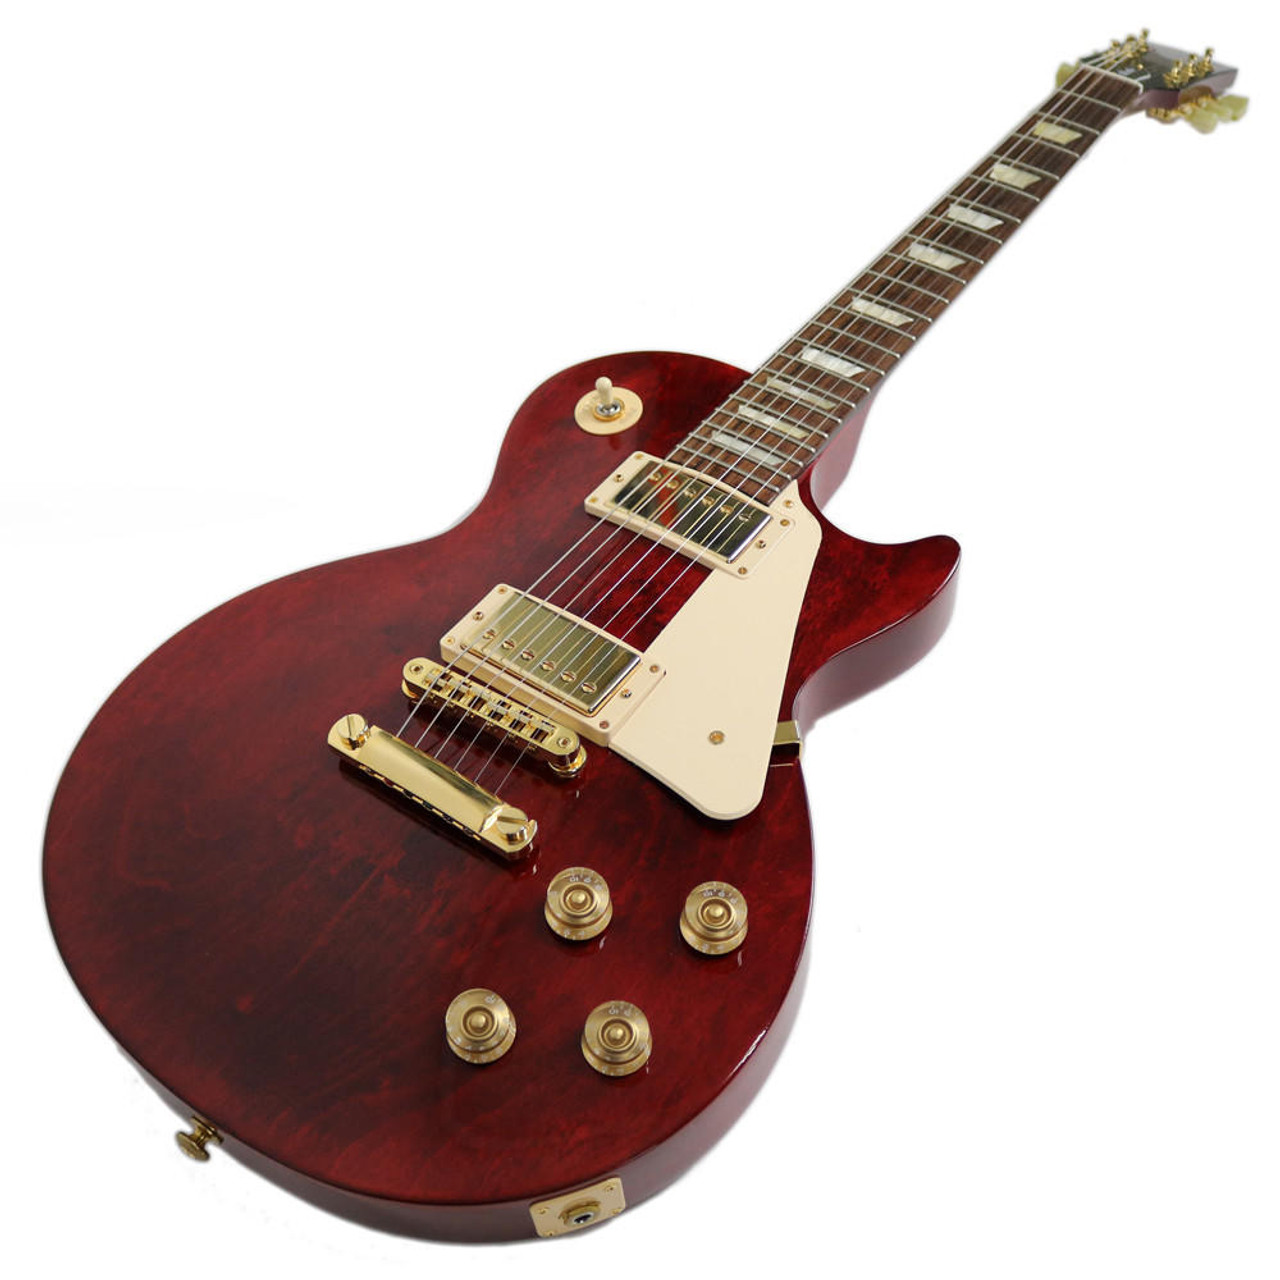 Used Gibson Les Paul Studio 2016 T w/ Gold Hardware in Wine Red